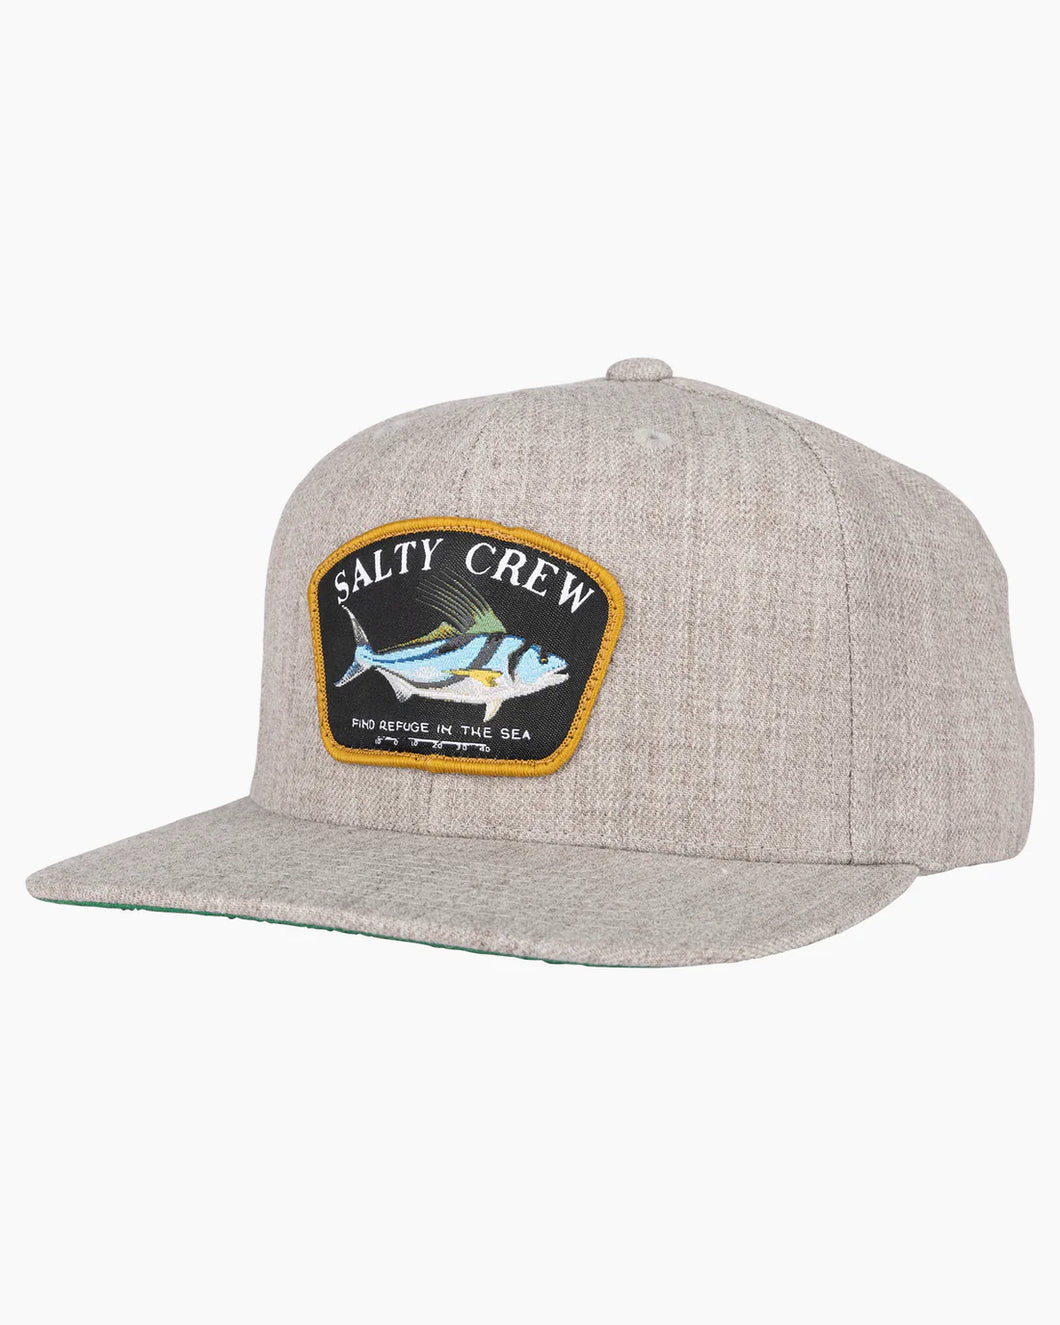 Salty Crew Rooster 6 Panel